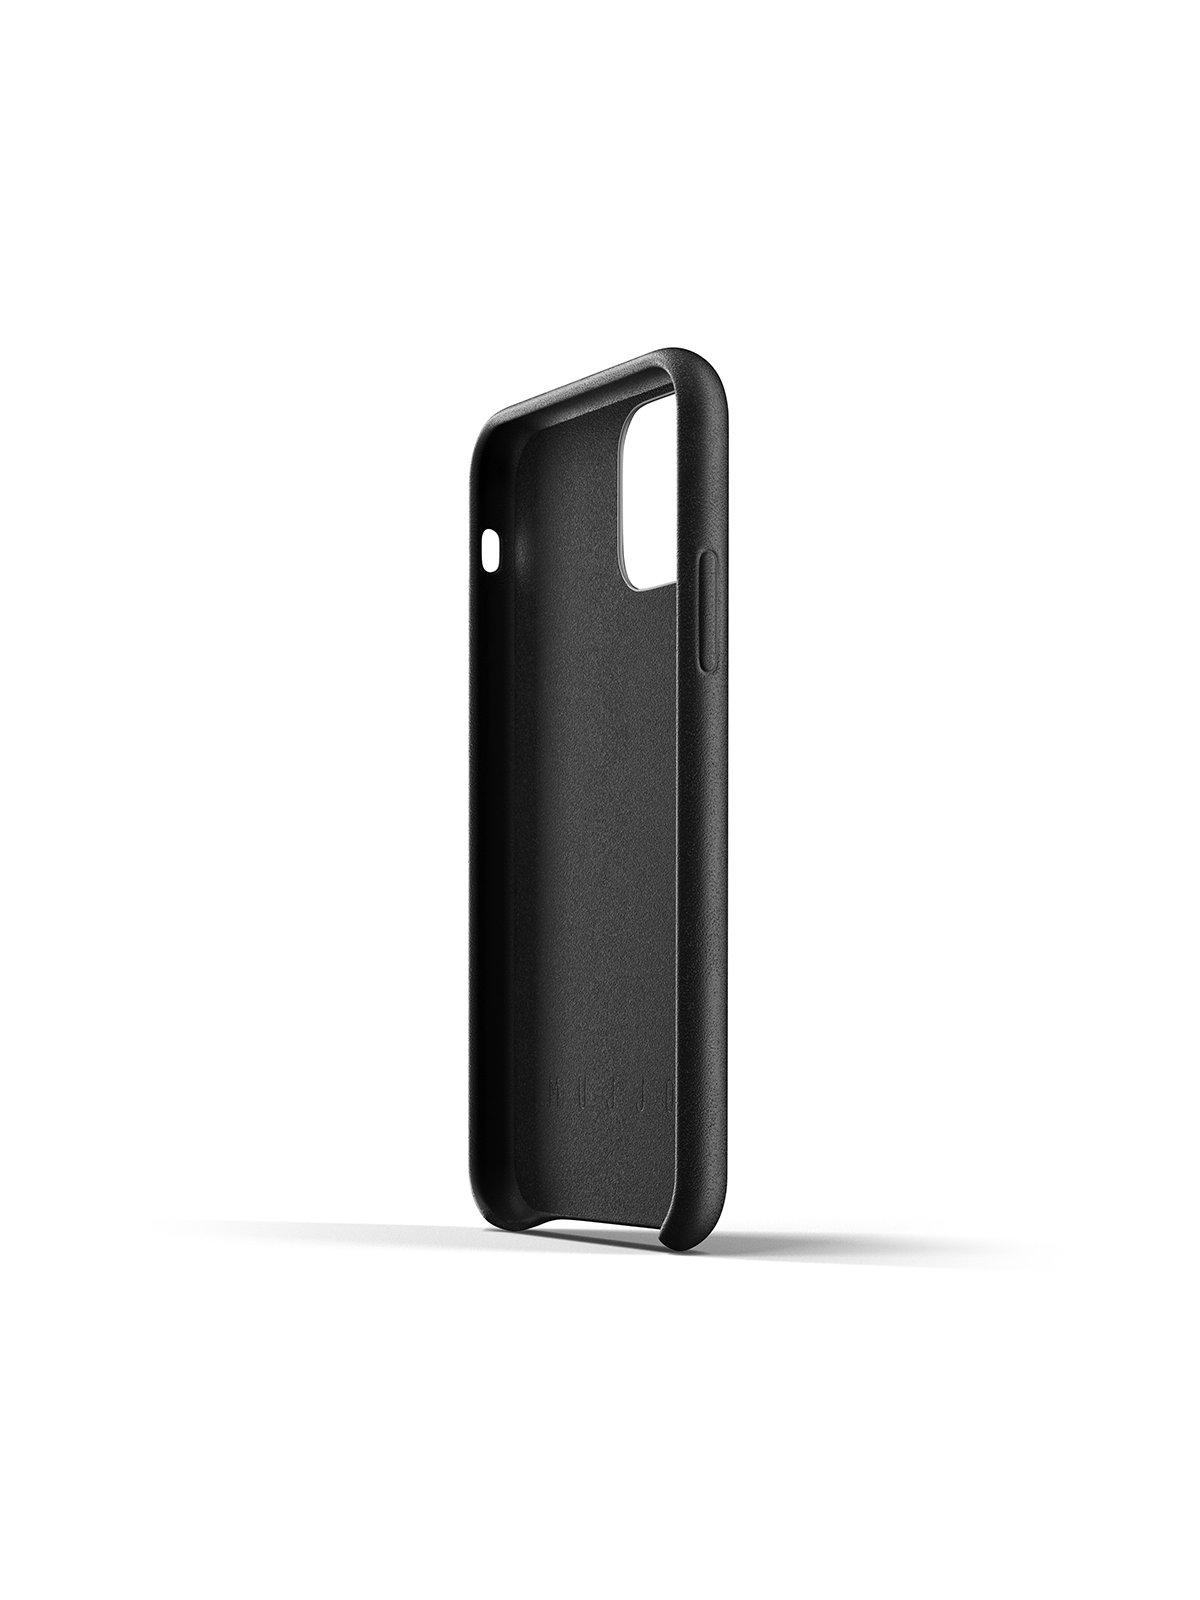 Mujjo Full Leather Wallet Case for iPhone 11 Pro Black - MORE by Morello Indonesia